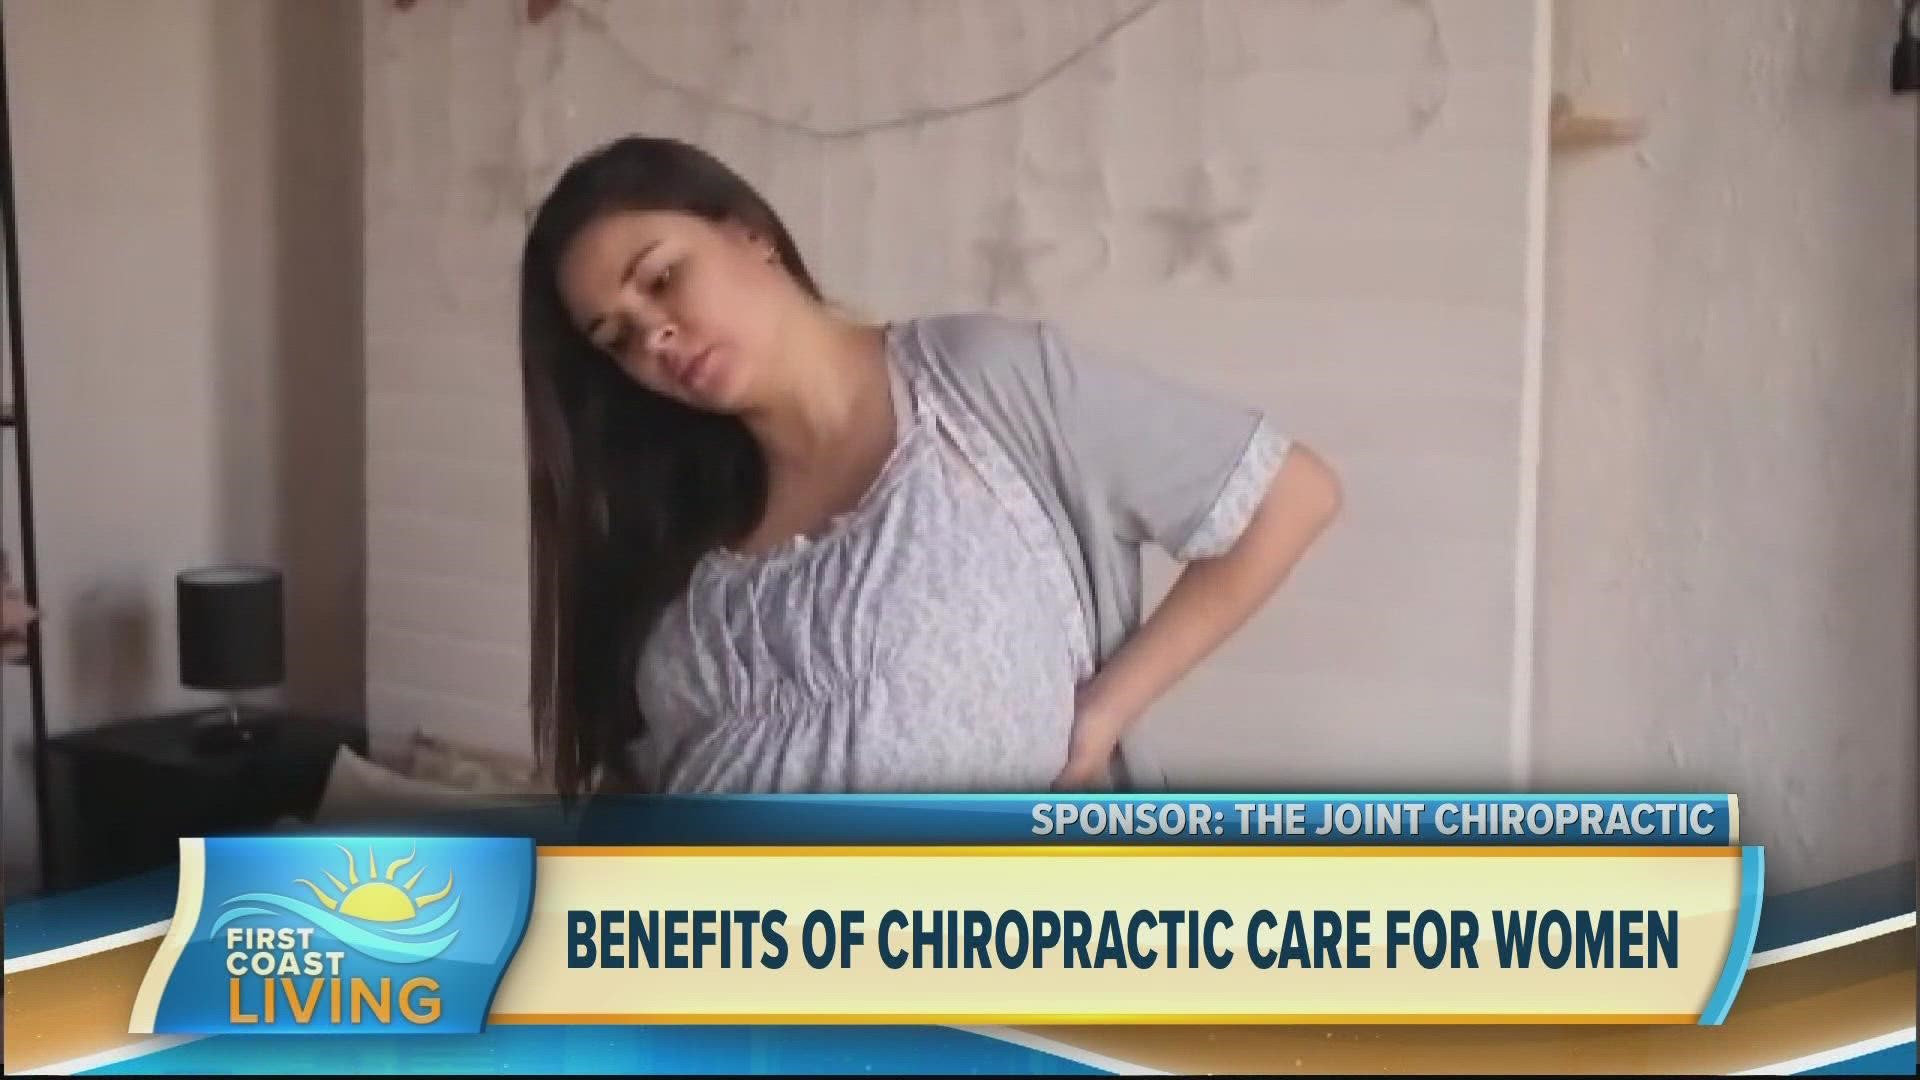 Executive Director of Chiropractic and Compliance at The Joint Chiropractic, Steven Knauf, D.C. discusses the benefits of chiropractic care for women.